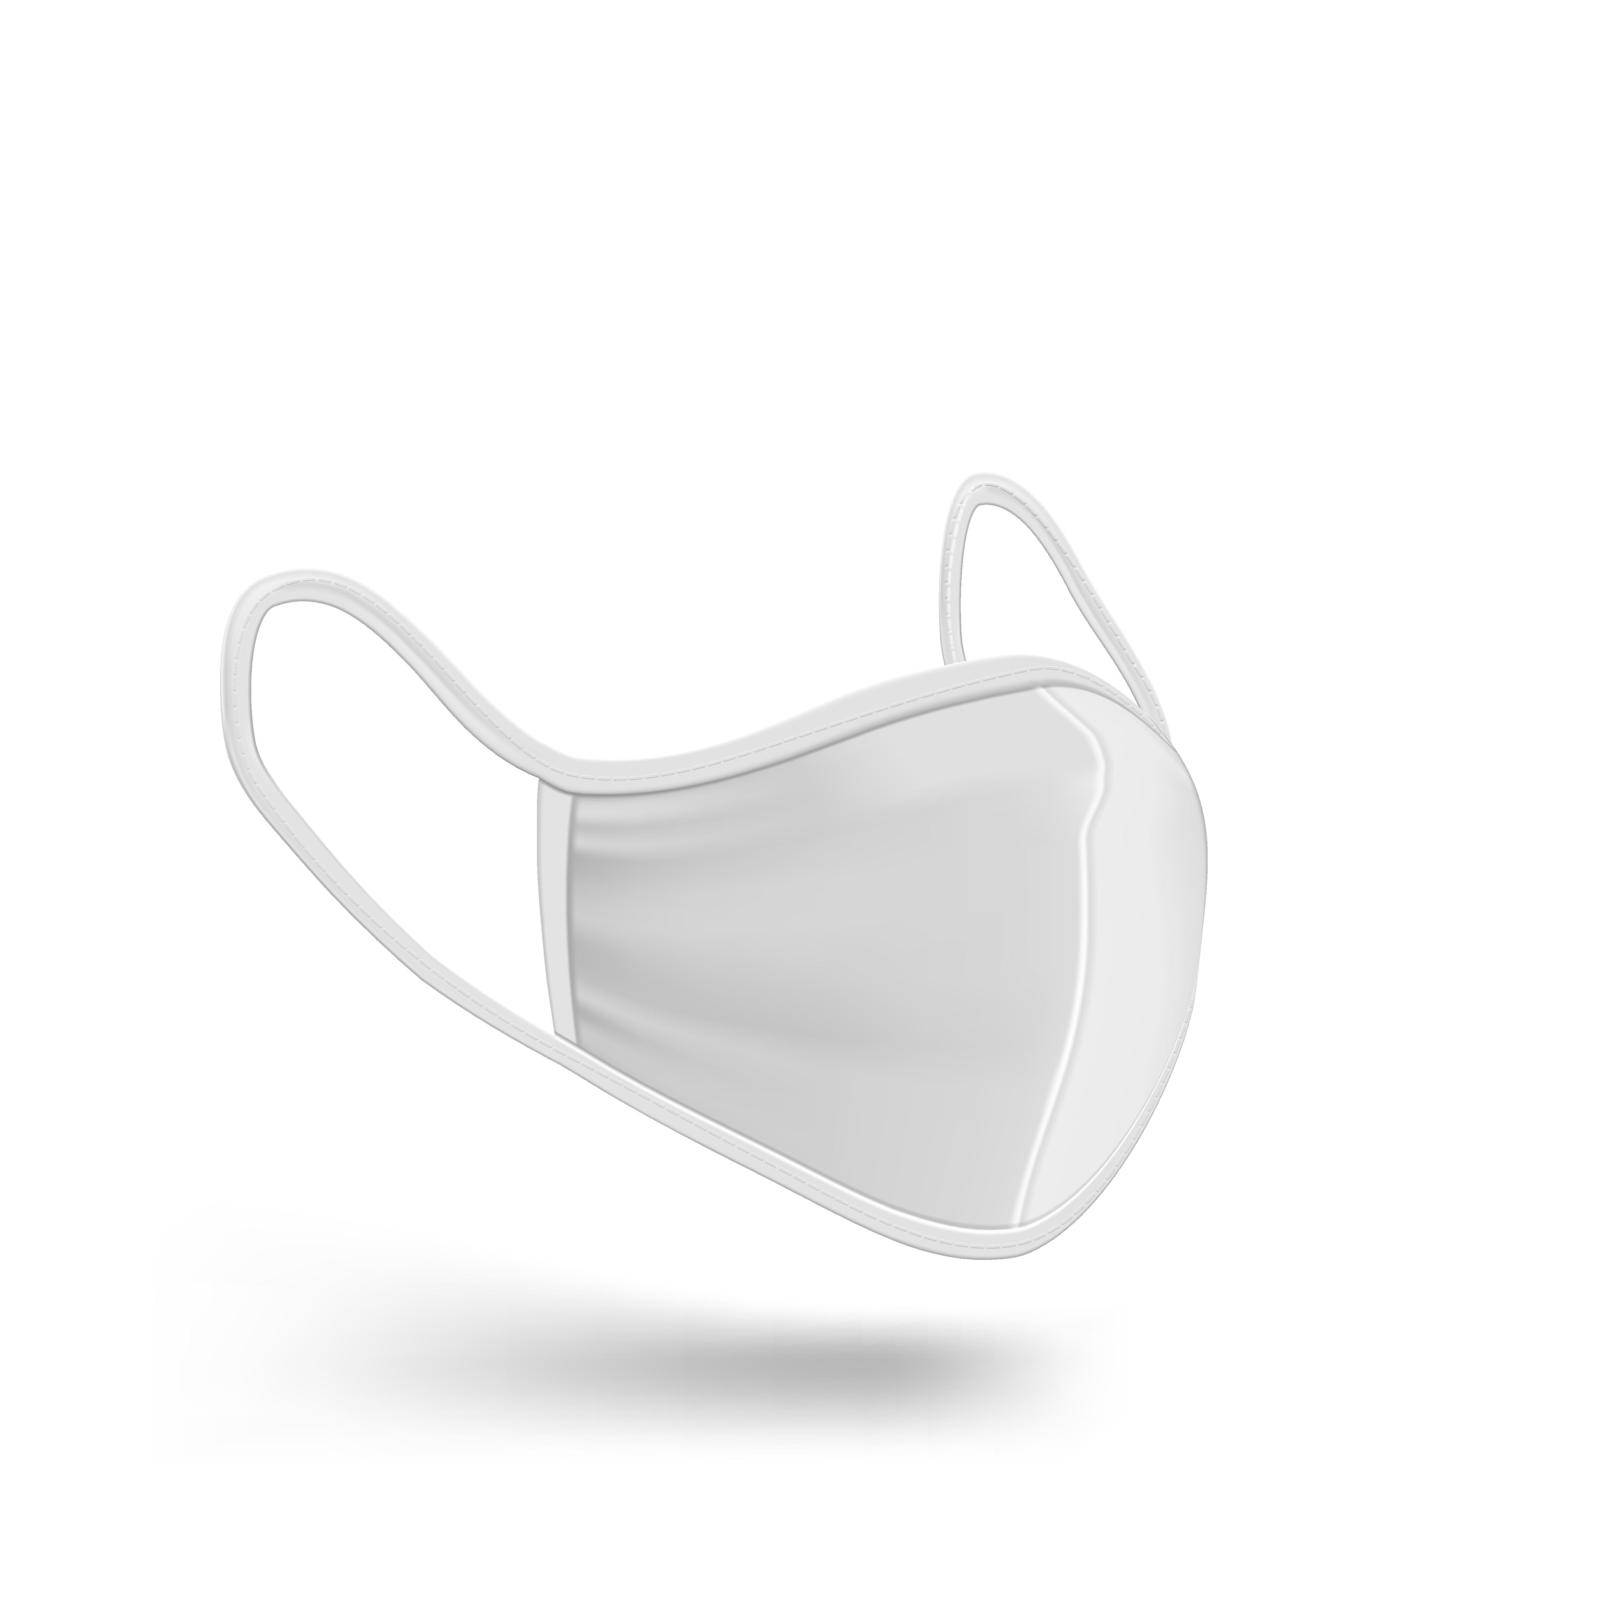 Clear White Fabric Protection Face Mask Mockup by VectorThings